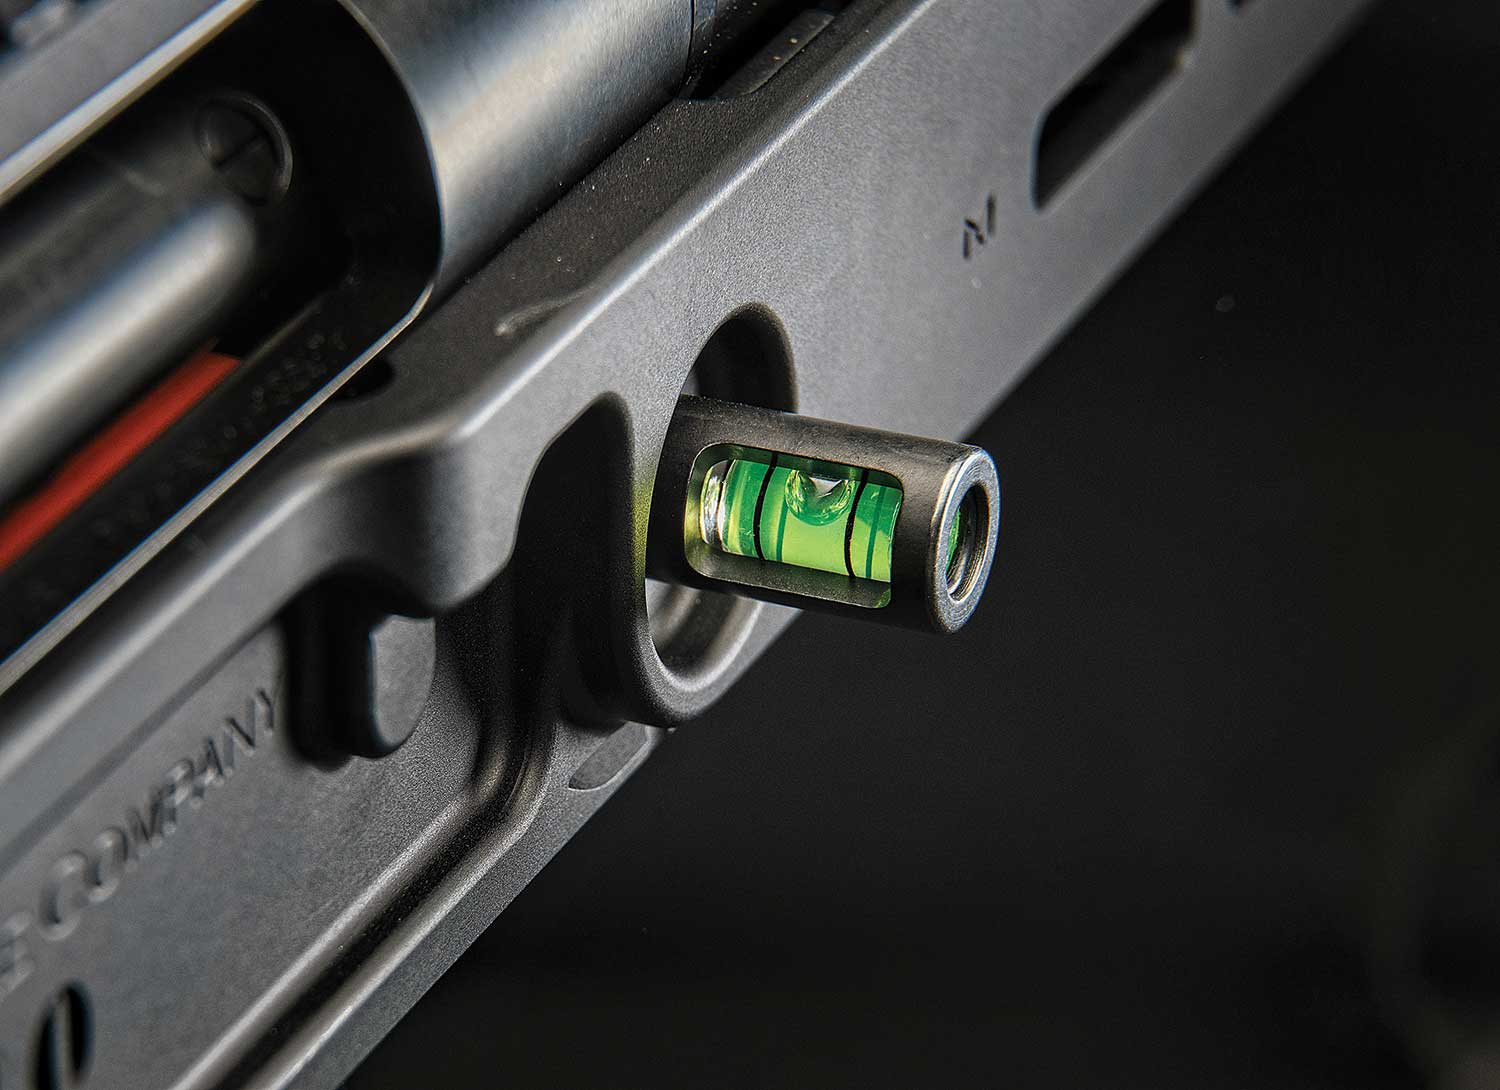 A bubble level attached to a hunting rifle stock.